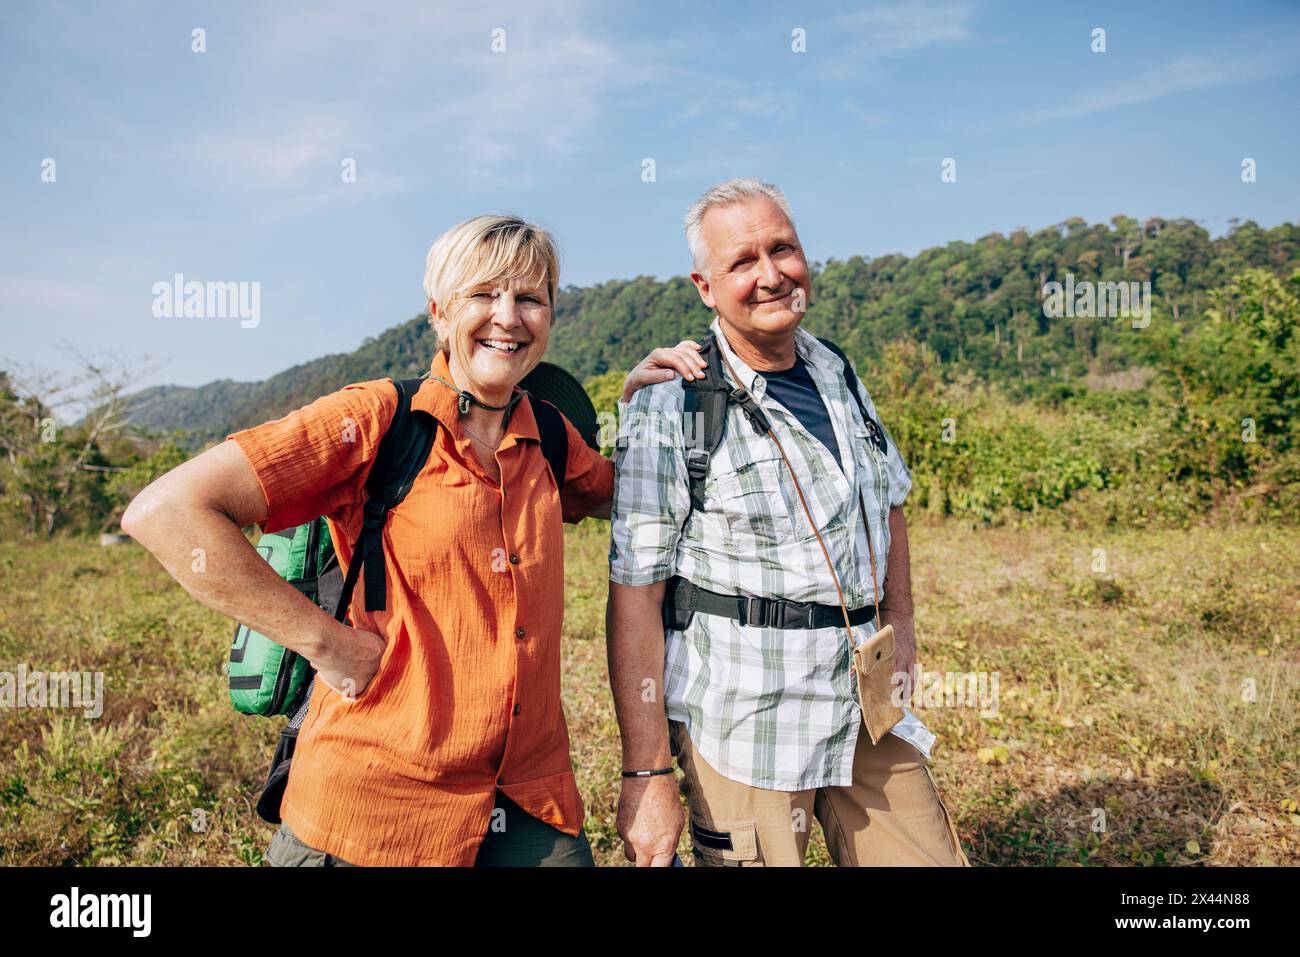 Portrait of smiling senior male and female tourists standing on grass at sunny day Stock Photo